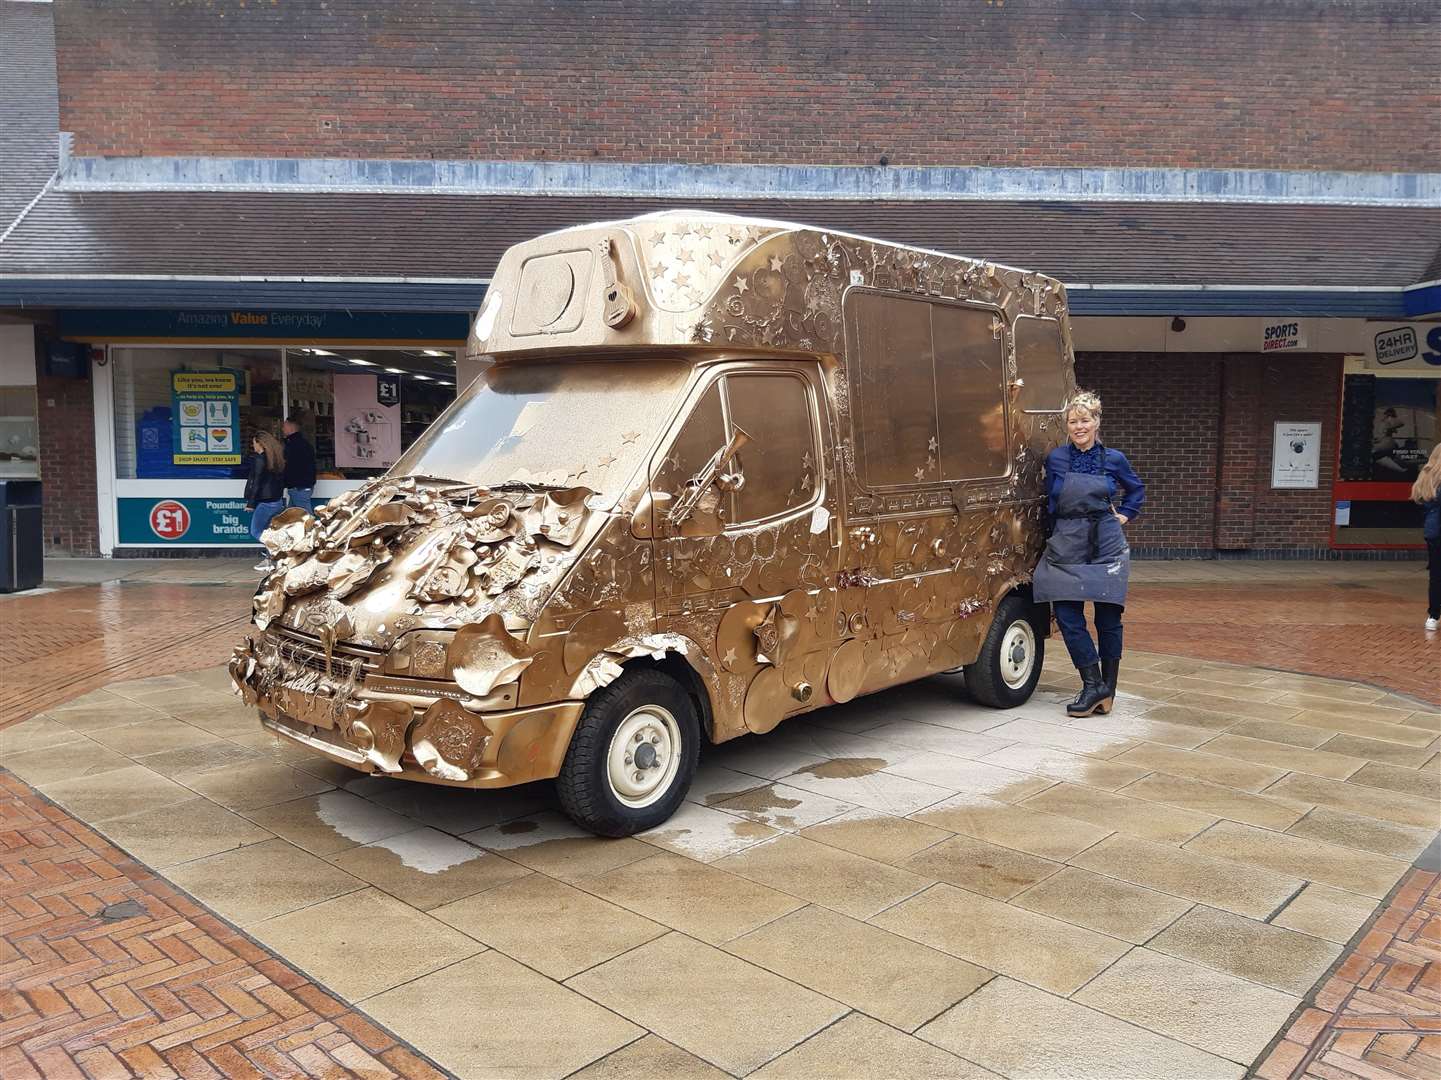 Sadie and the golden ice cream van which doubles as a DJ booth